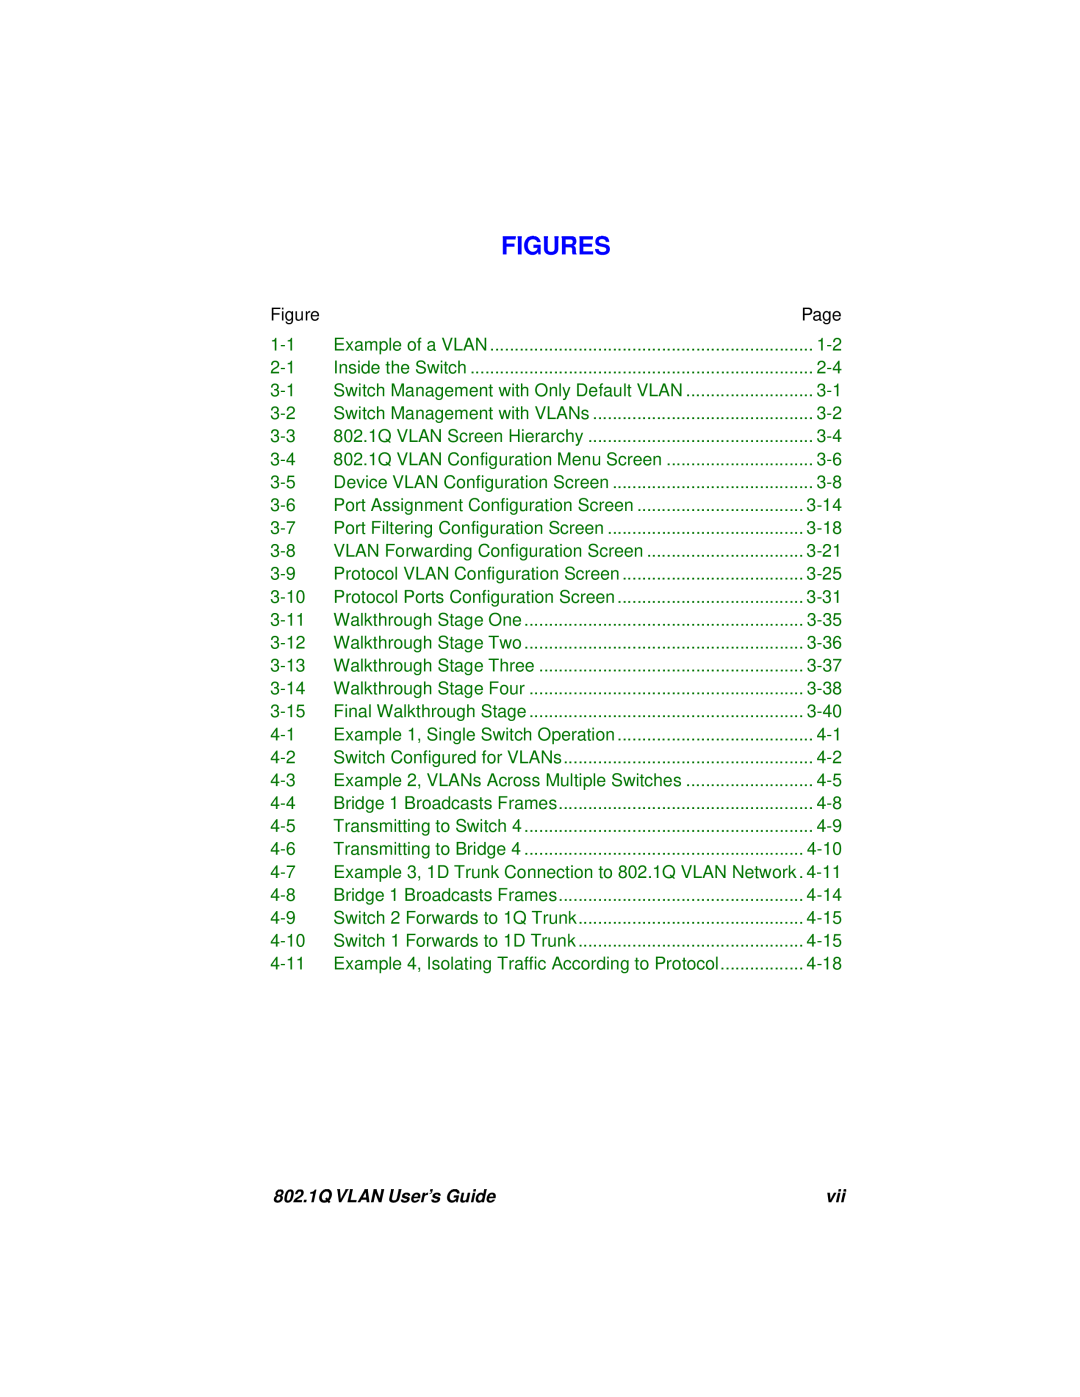 Cabletron Systems manual Figures, 802.1Q VLAN User’s Guide 